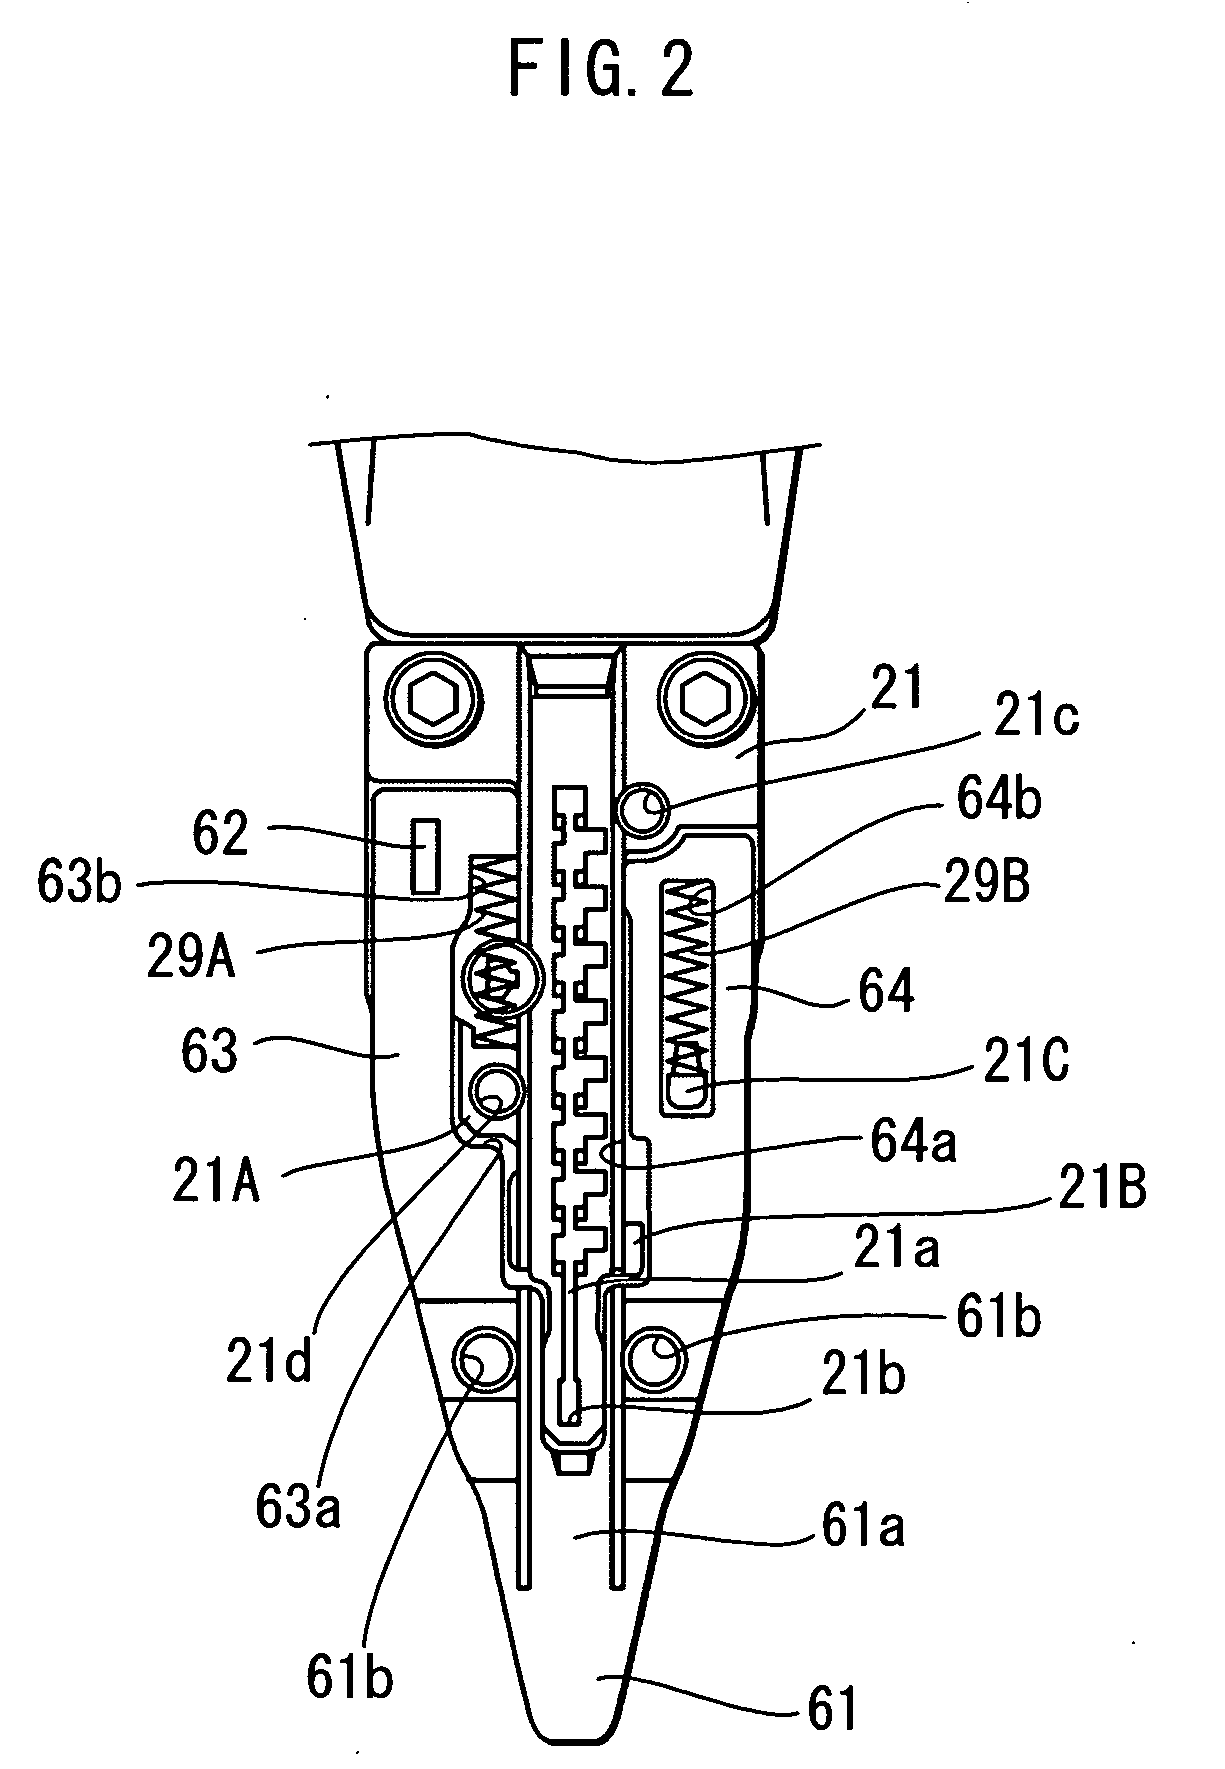 Fastener driving tool having contact arm in contact with workpiece